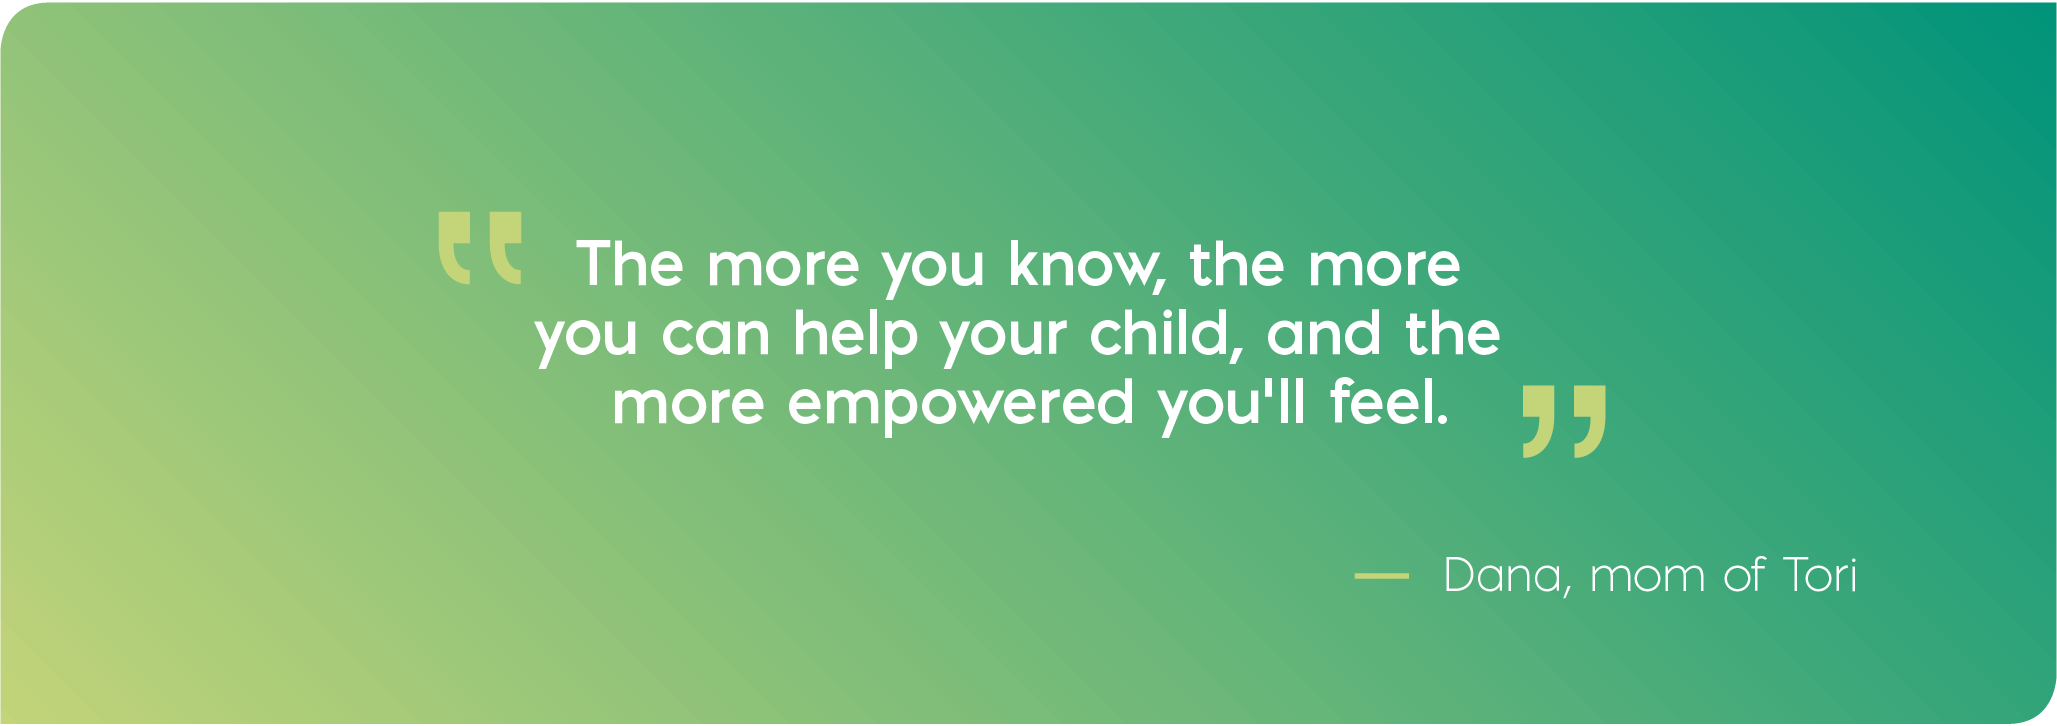 The more you know, the more you can help your child, and the more empowered you'll feel. Quote from Dana, mom of Tori